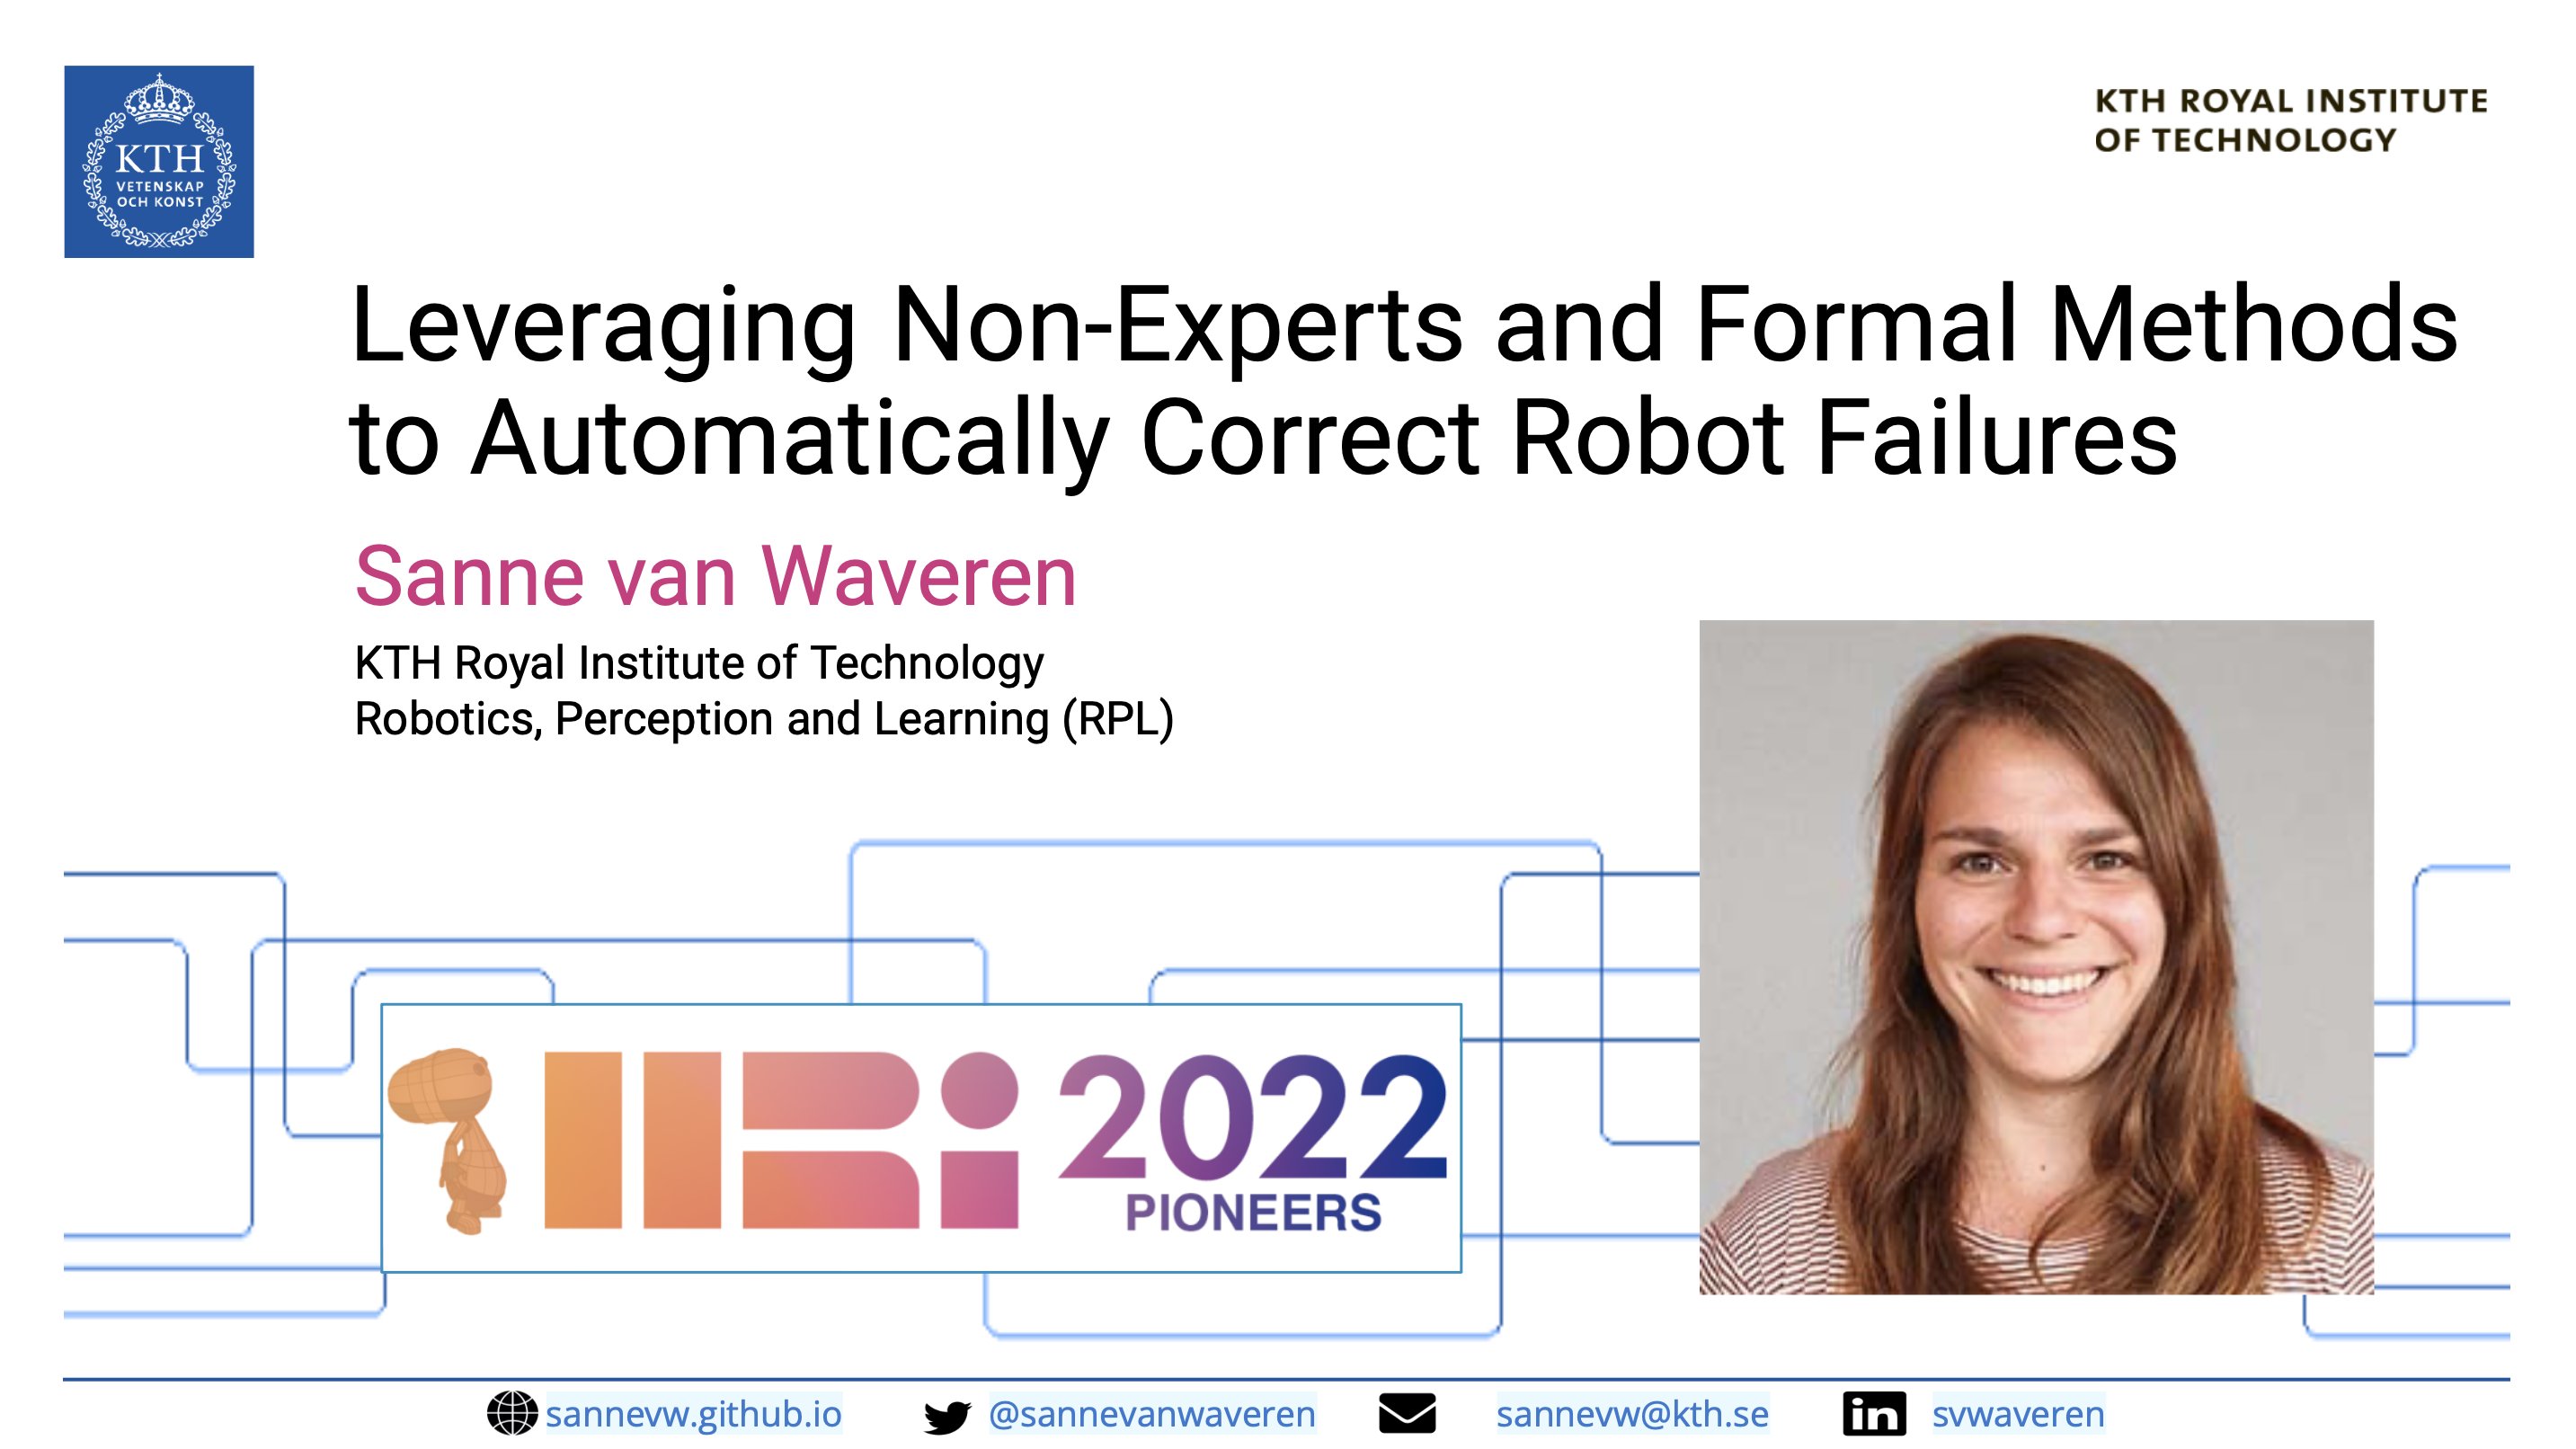 Mejorar Cabeza Accesible KTH Robotics, Perception and Learning Lab on Twitter: "Congratulations to  Sanne van Waveren (@sannevanwaveren) who was selected for this year's HRI  Pioneers cohort #HRIPioneers2022! Tune in to Sanne's talk during #HRI2022 in